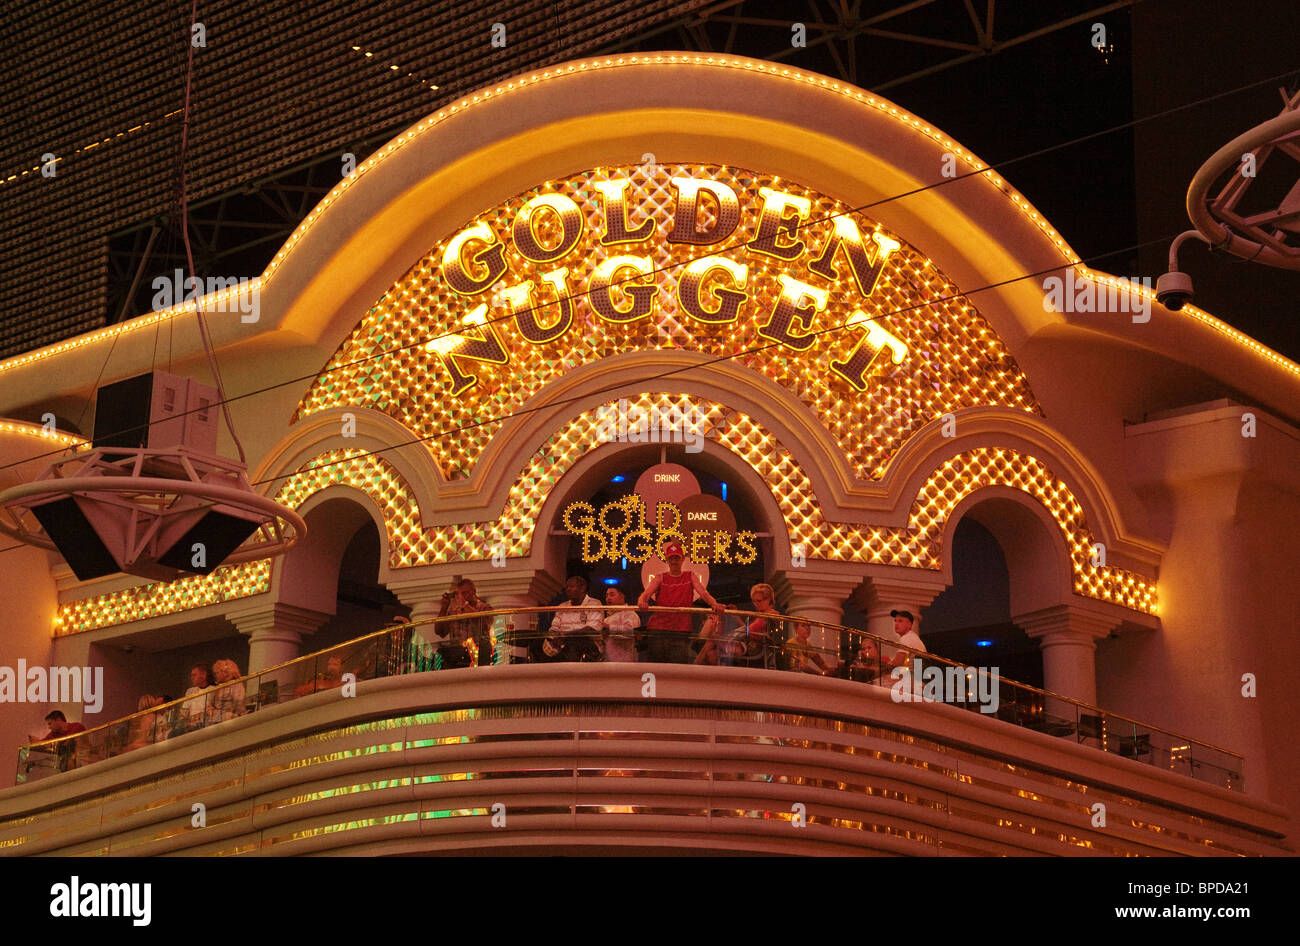 Le Golden Nugget Hotel and Casino, Fremont St, Las Vegas NEVADA USA Banque D'Images